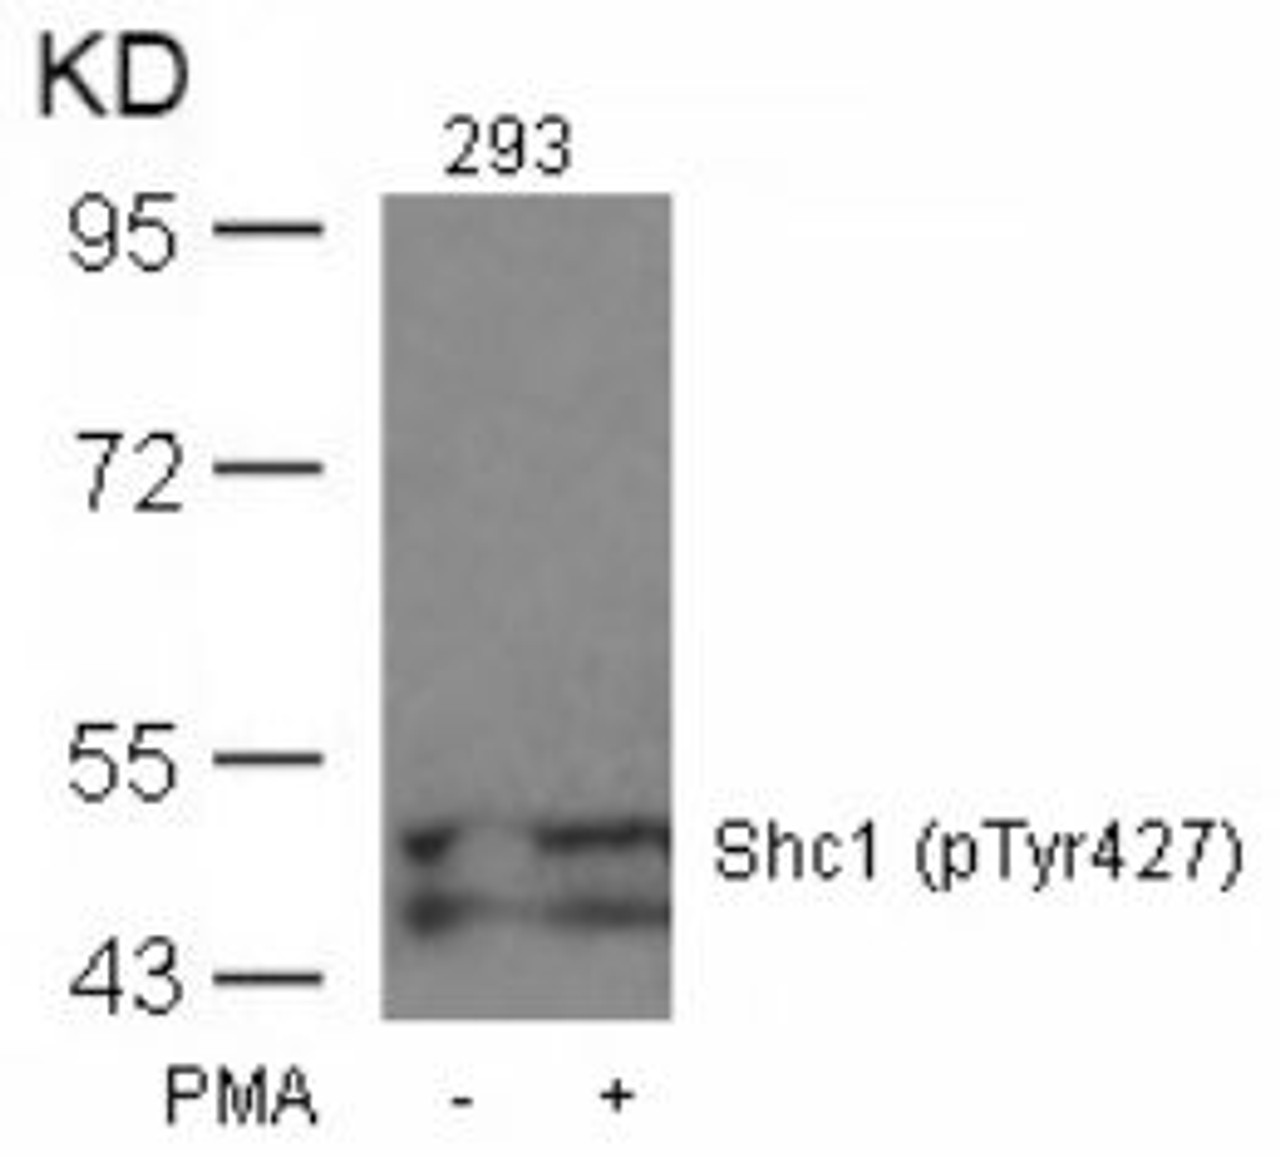 Western blot analysis of lysed extracts from 293 cells untreated or treated with PMA using Shc1 (Phospho-Tyr427) .